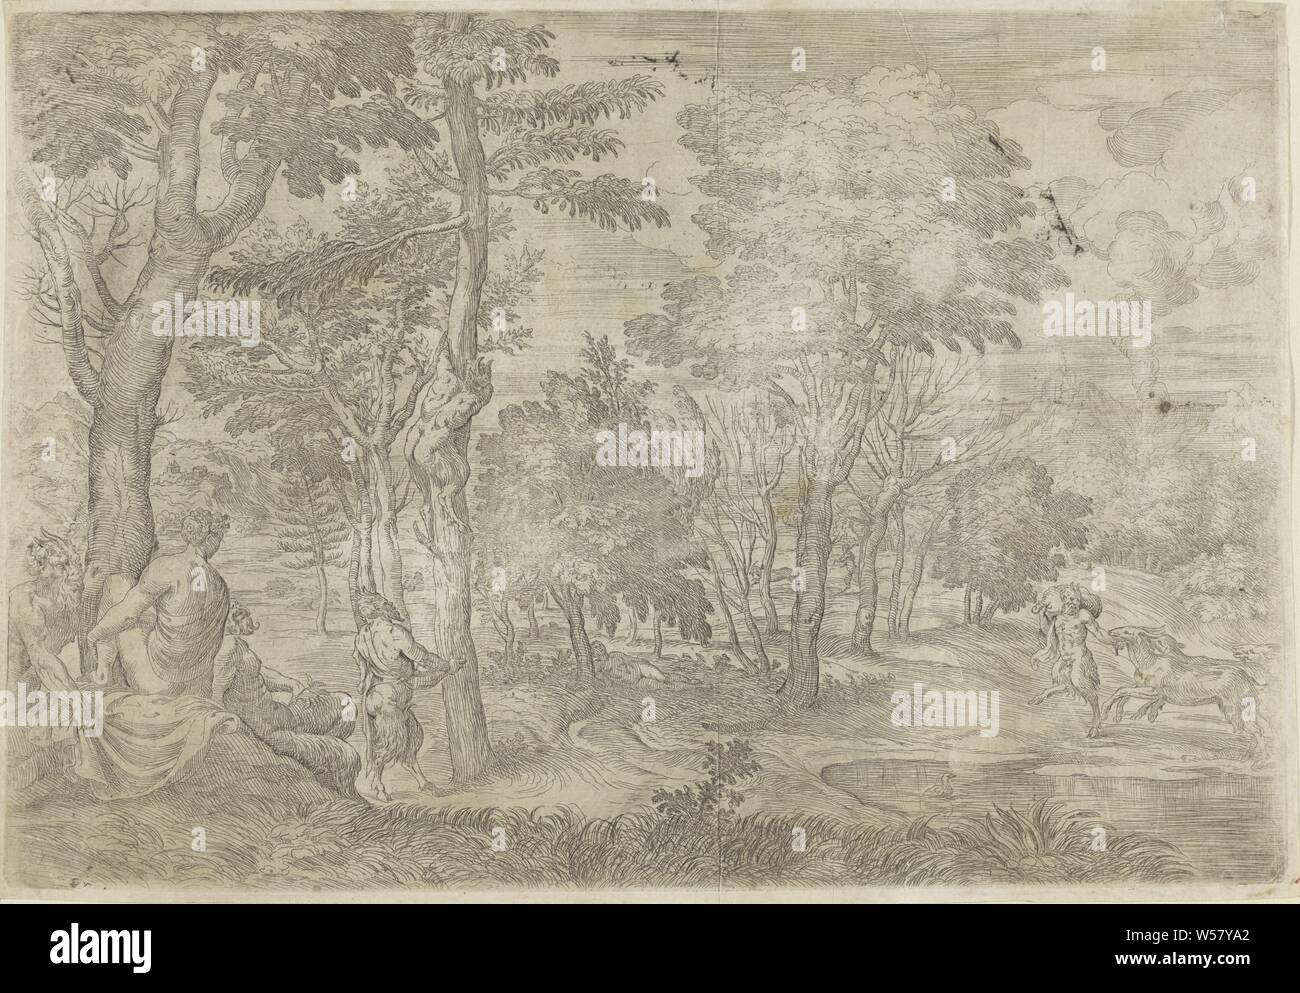 Landscape with nymphs and satyrs, A landscape with nymphs and satyrs. A satyr climbs a tree. On the right a satyr with three goats, landscapes, nymphs (in general), 'Ninfe in commune' (Ripa), satyr (s) (in general), goat, Giovanni Francesco Grimaldi, 1616 - 1680, paper, etching, h 275 mm × w 401 mm Stock Photo